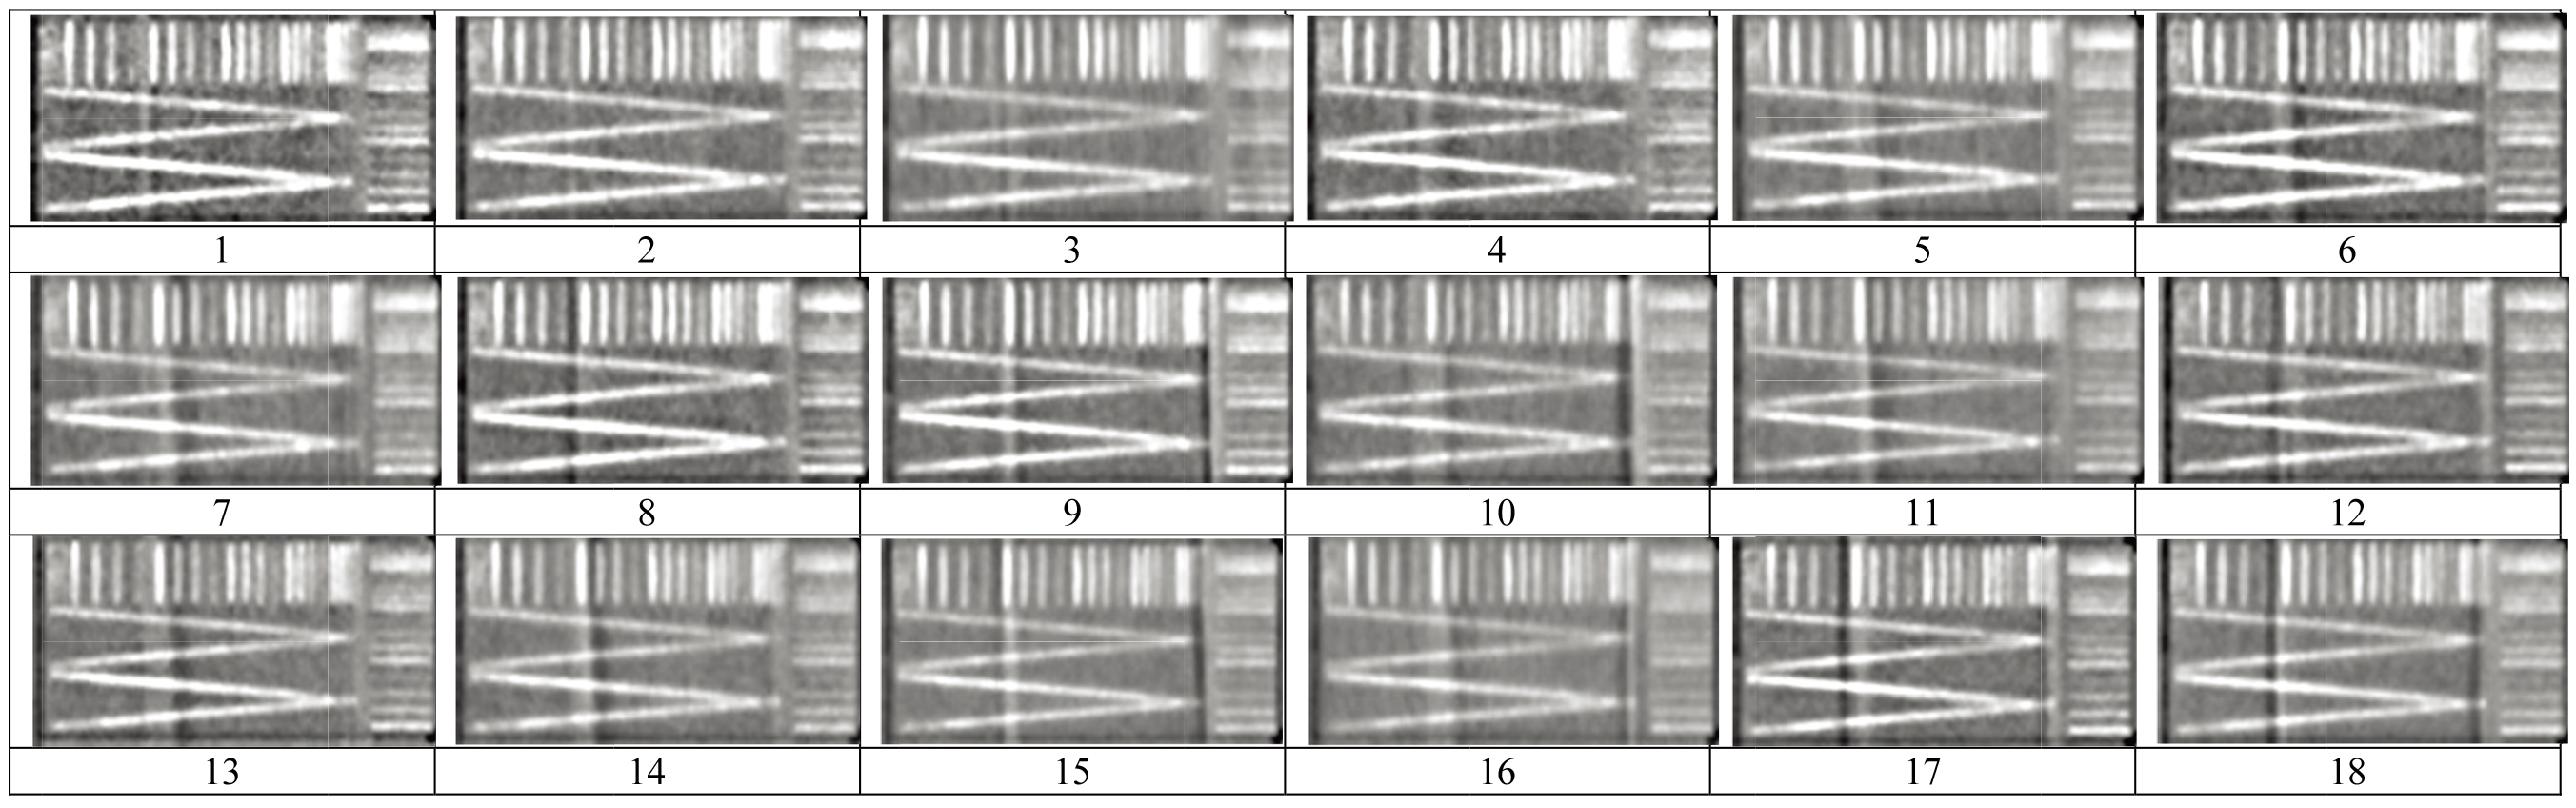 Typical V-shaped line gauge images from cardiac CTA scans of 18 groups in the 70 kg PMMA phantom. Since those obtained via 50 or 90 kg ones were quite similar, they were omitted for brevity.